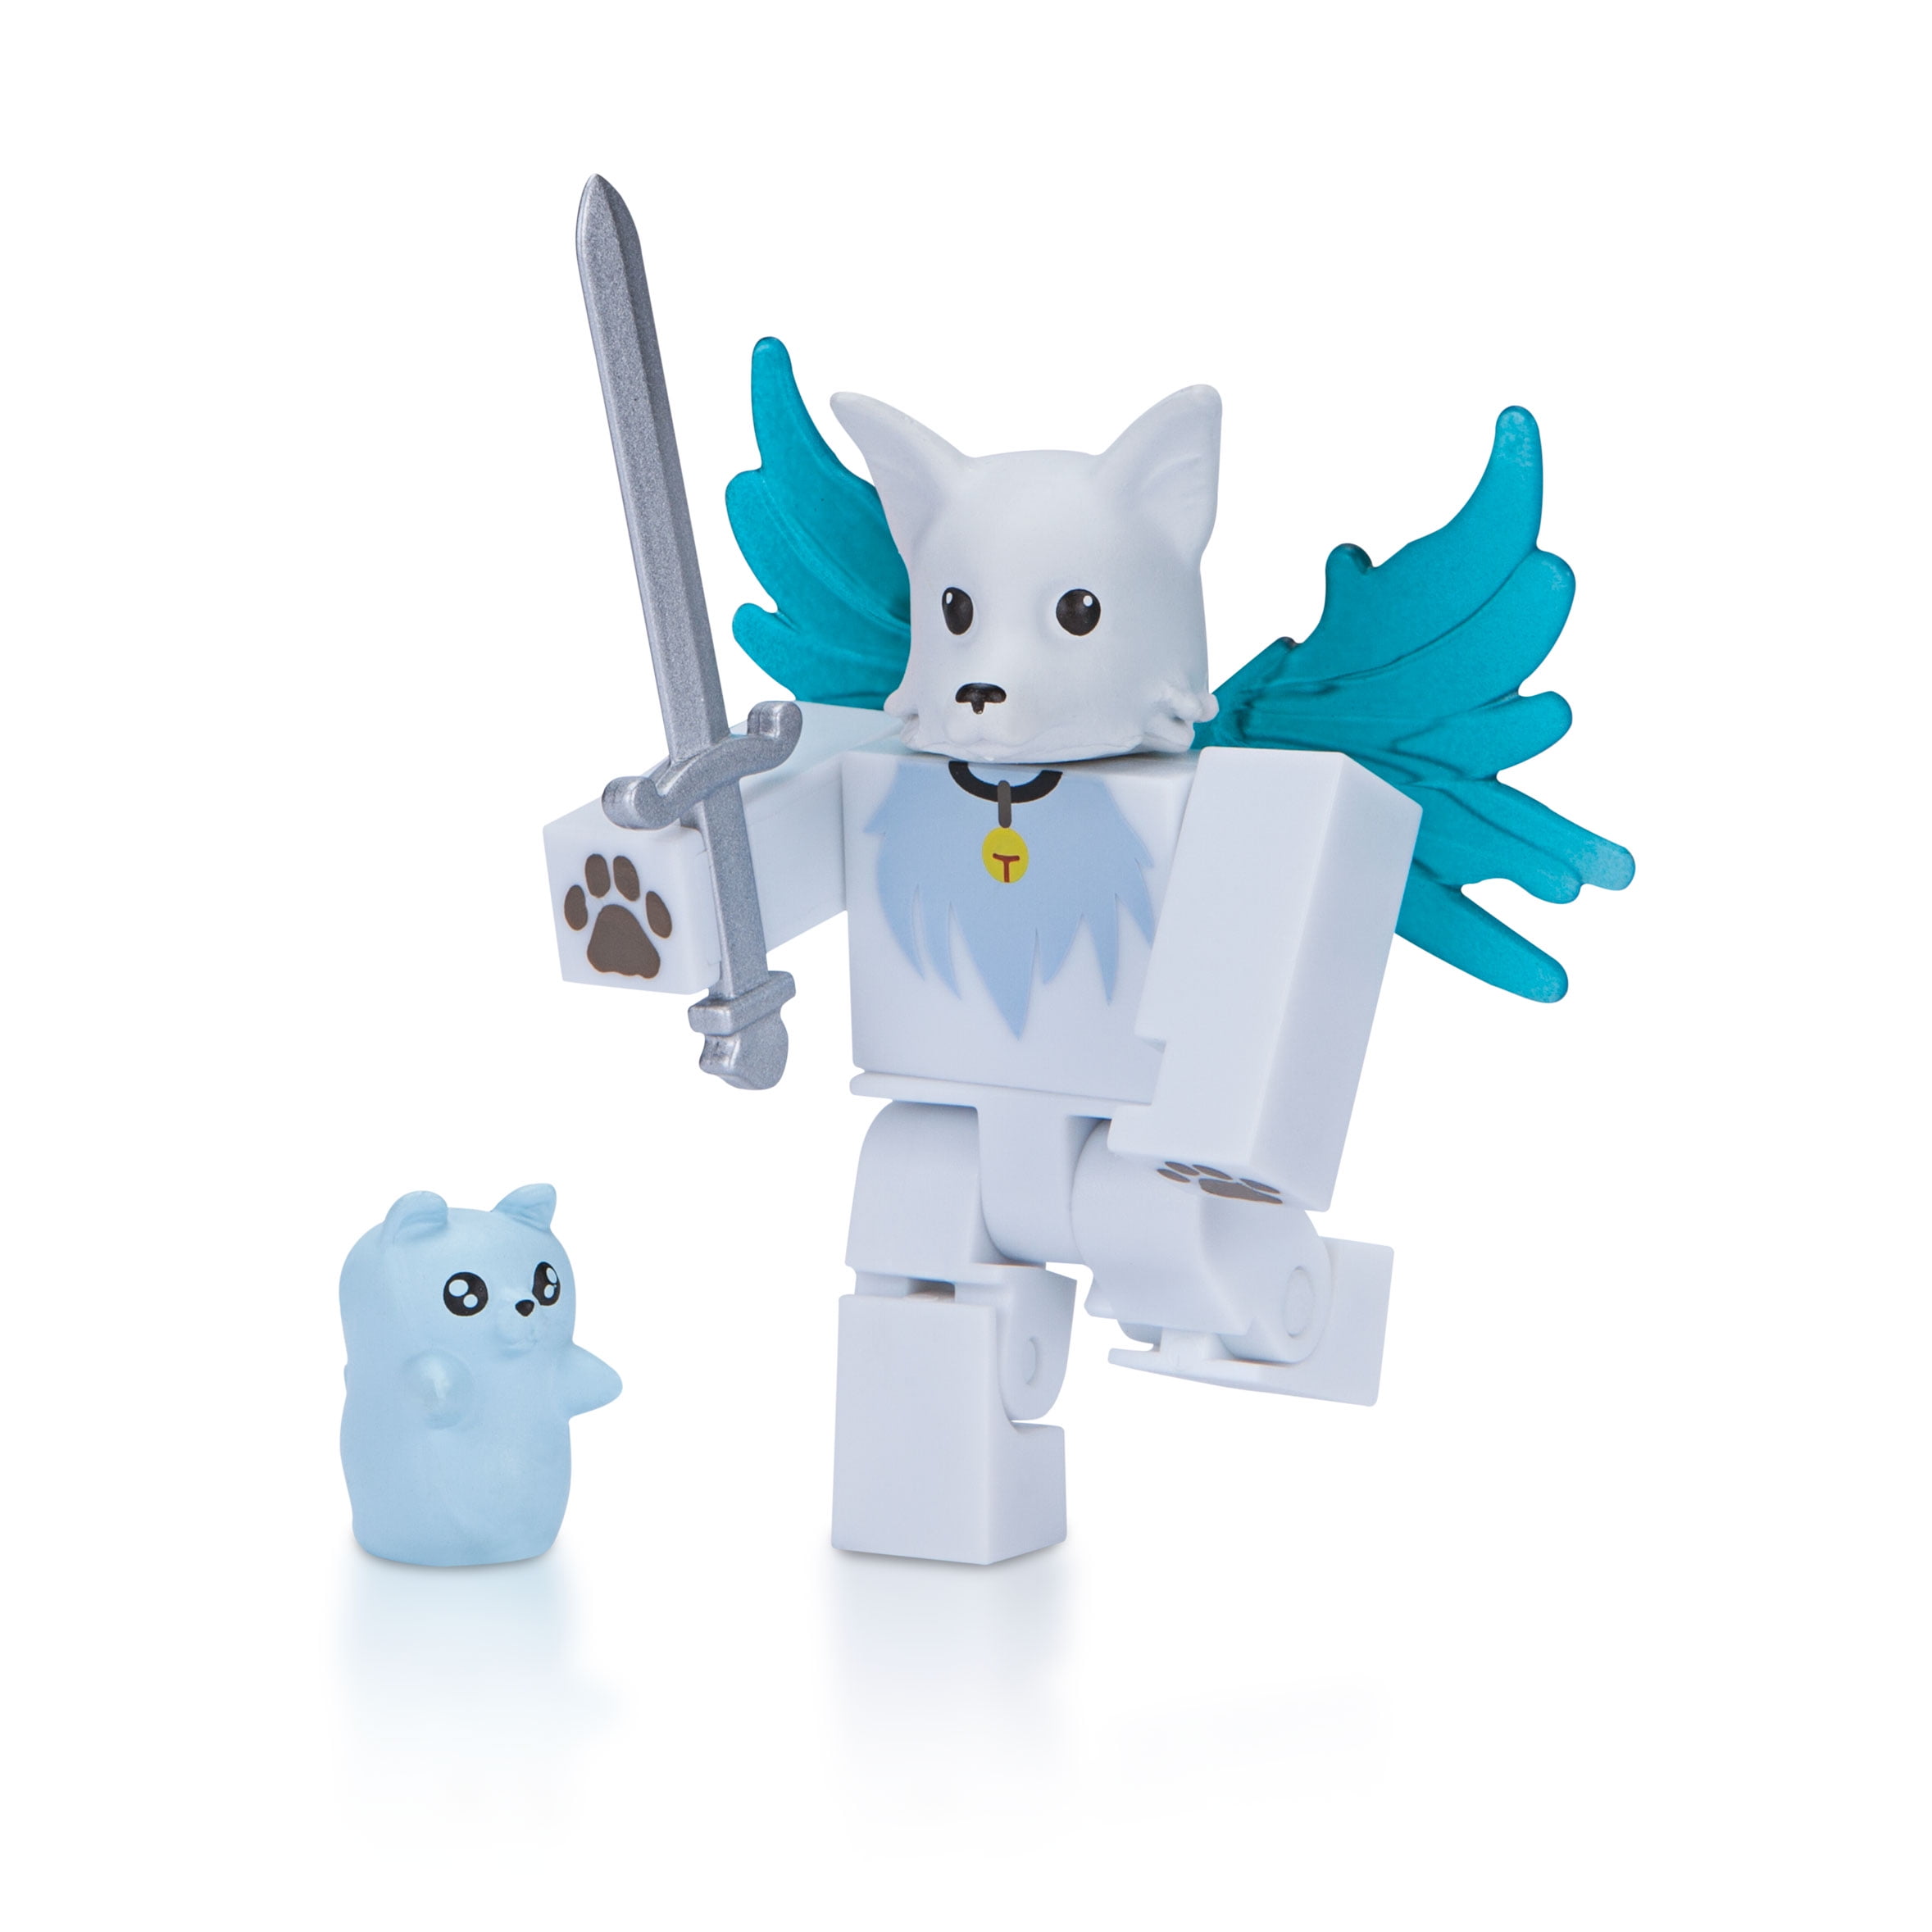 ROBLOX 2017 Series 2 Phantom Forces Ghost Mini Figure Online Code for sale  online